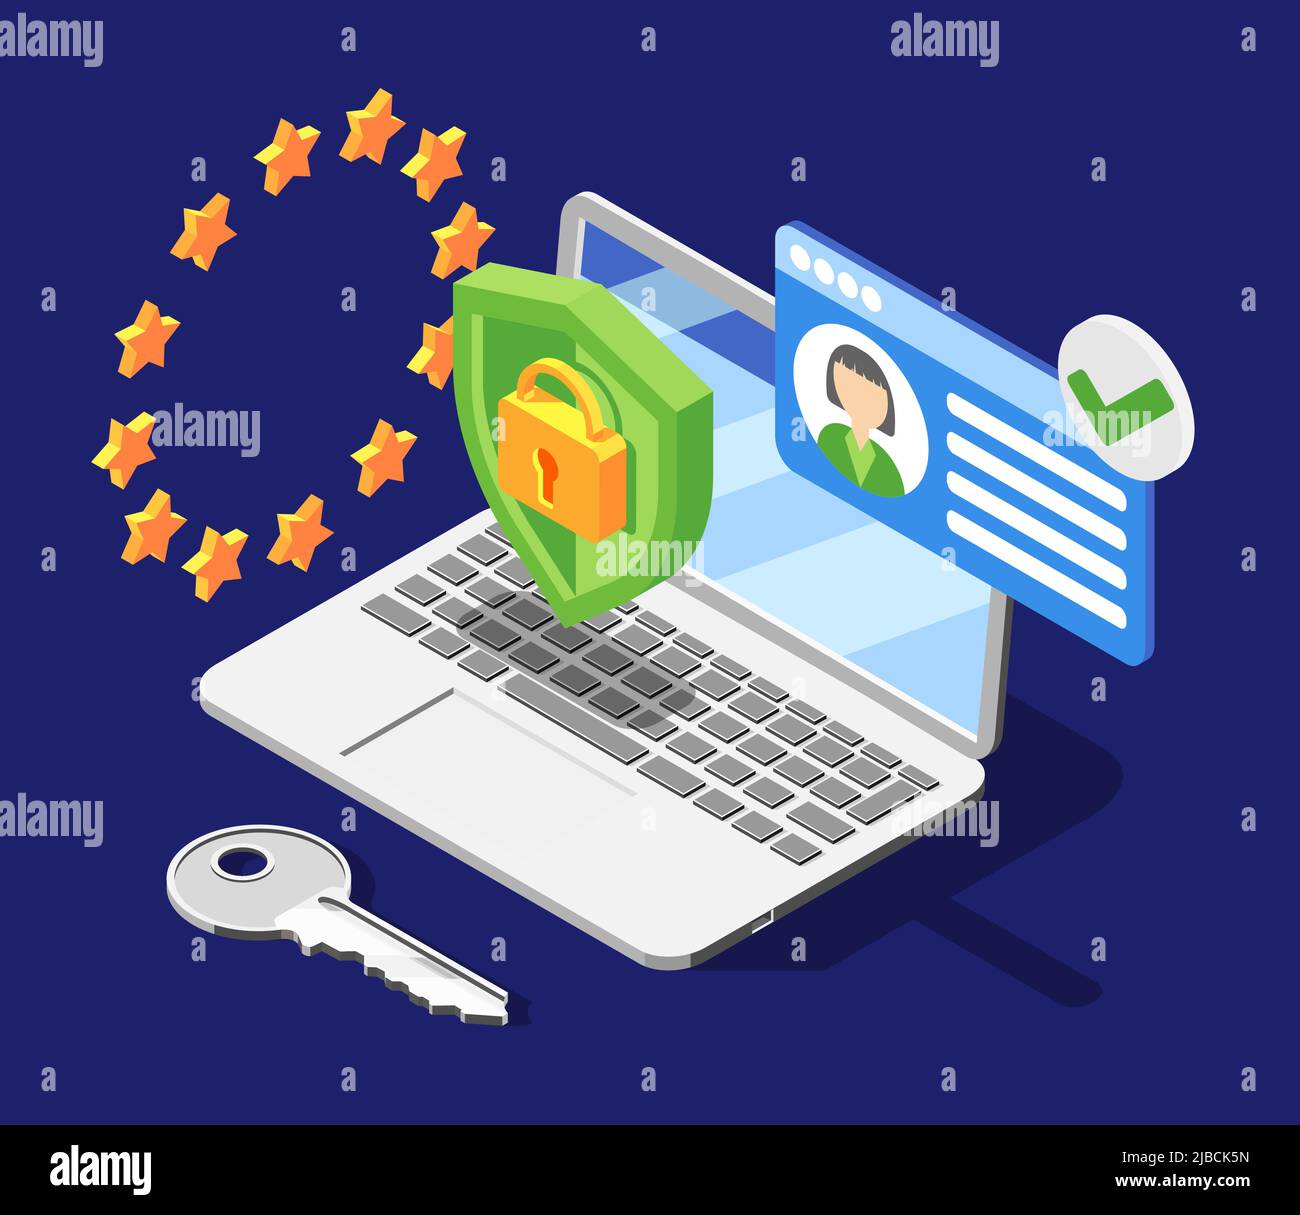 Personal data protection gdpr isometric background with european union symbolics shield and lock pictograms with laptop vector illustration Stock Vector